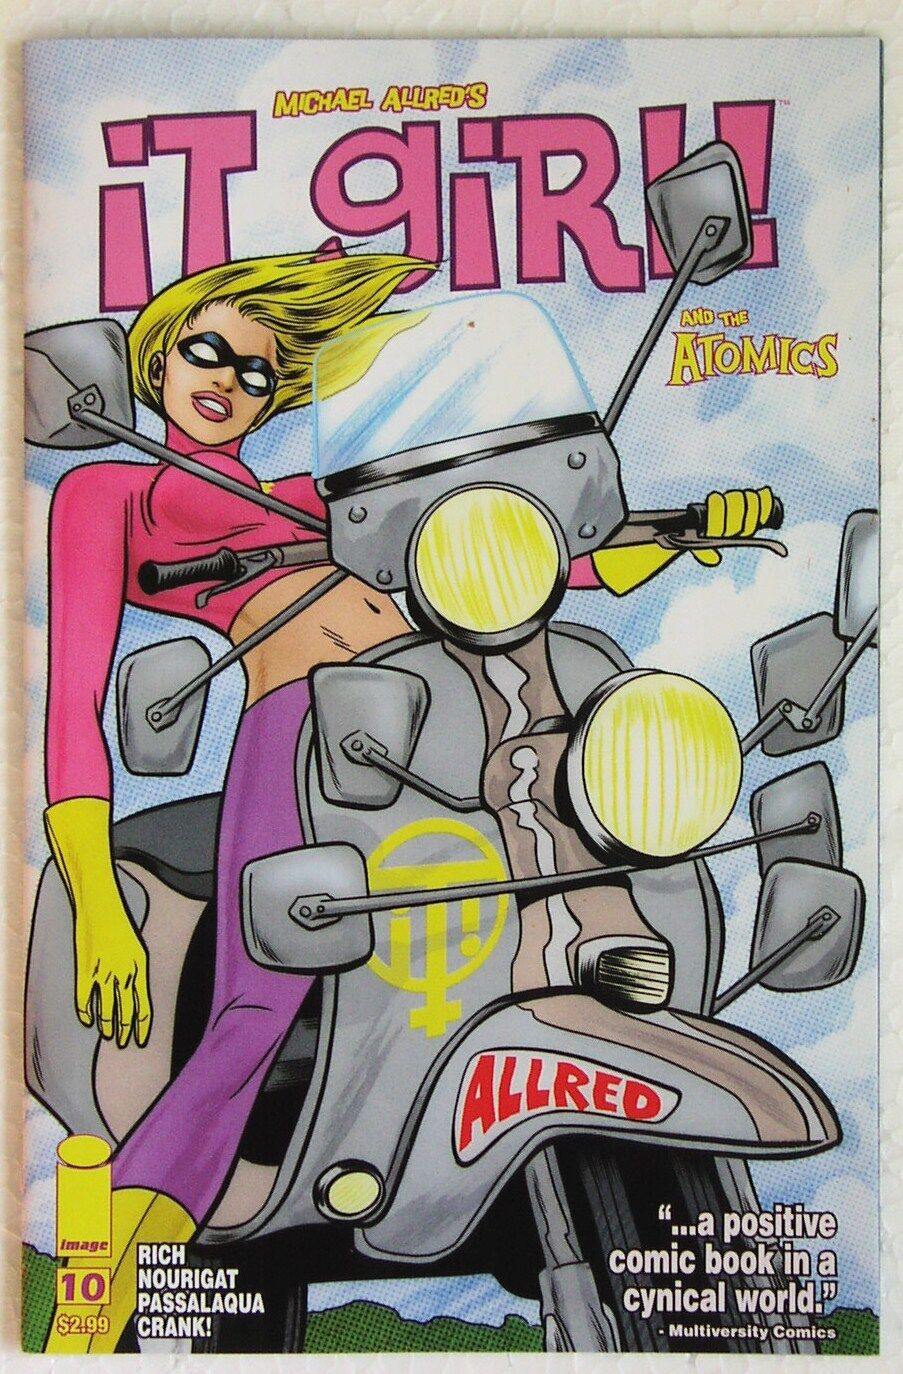 It Girl and the Atomics comic book w/sexy Lambretta cover art by Mike Allred